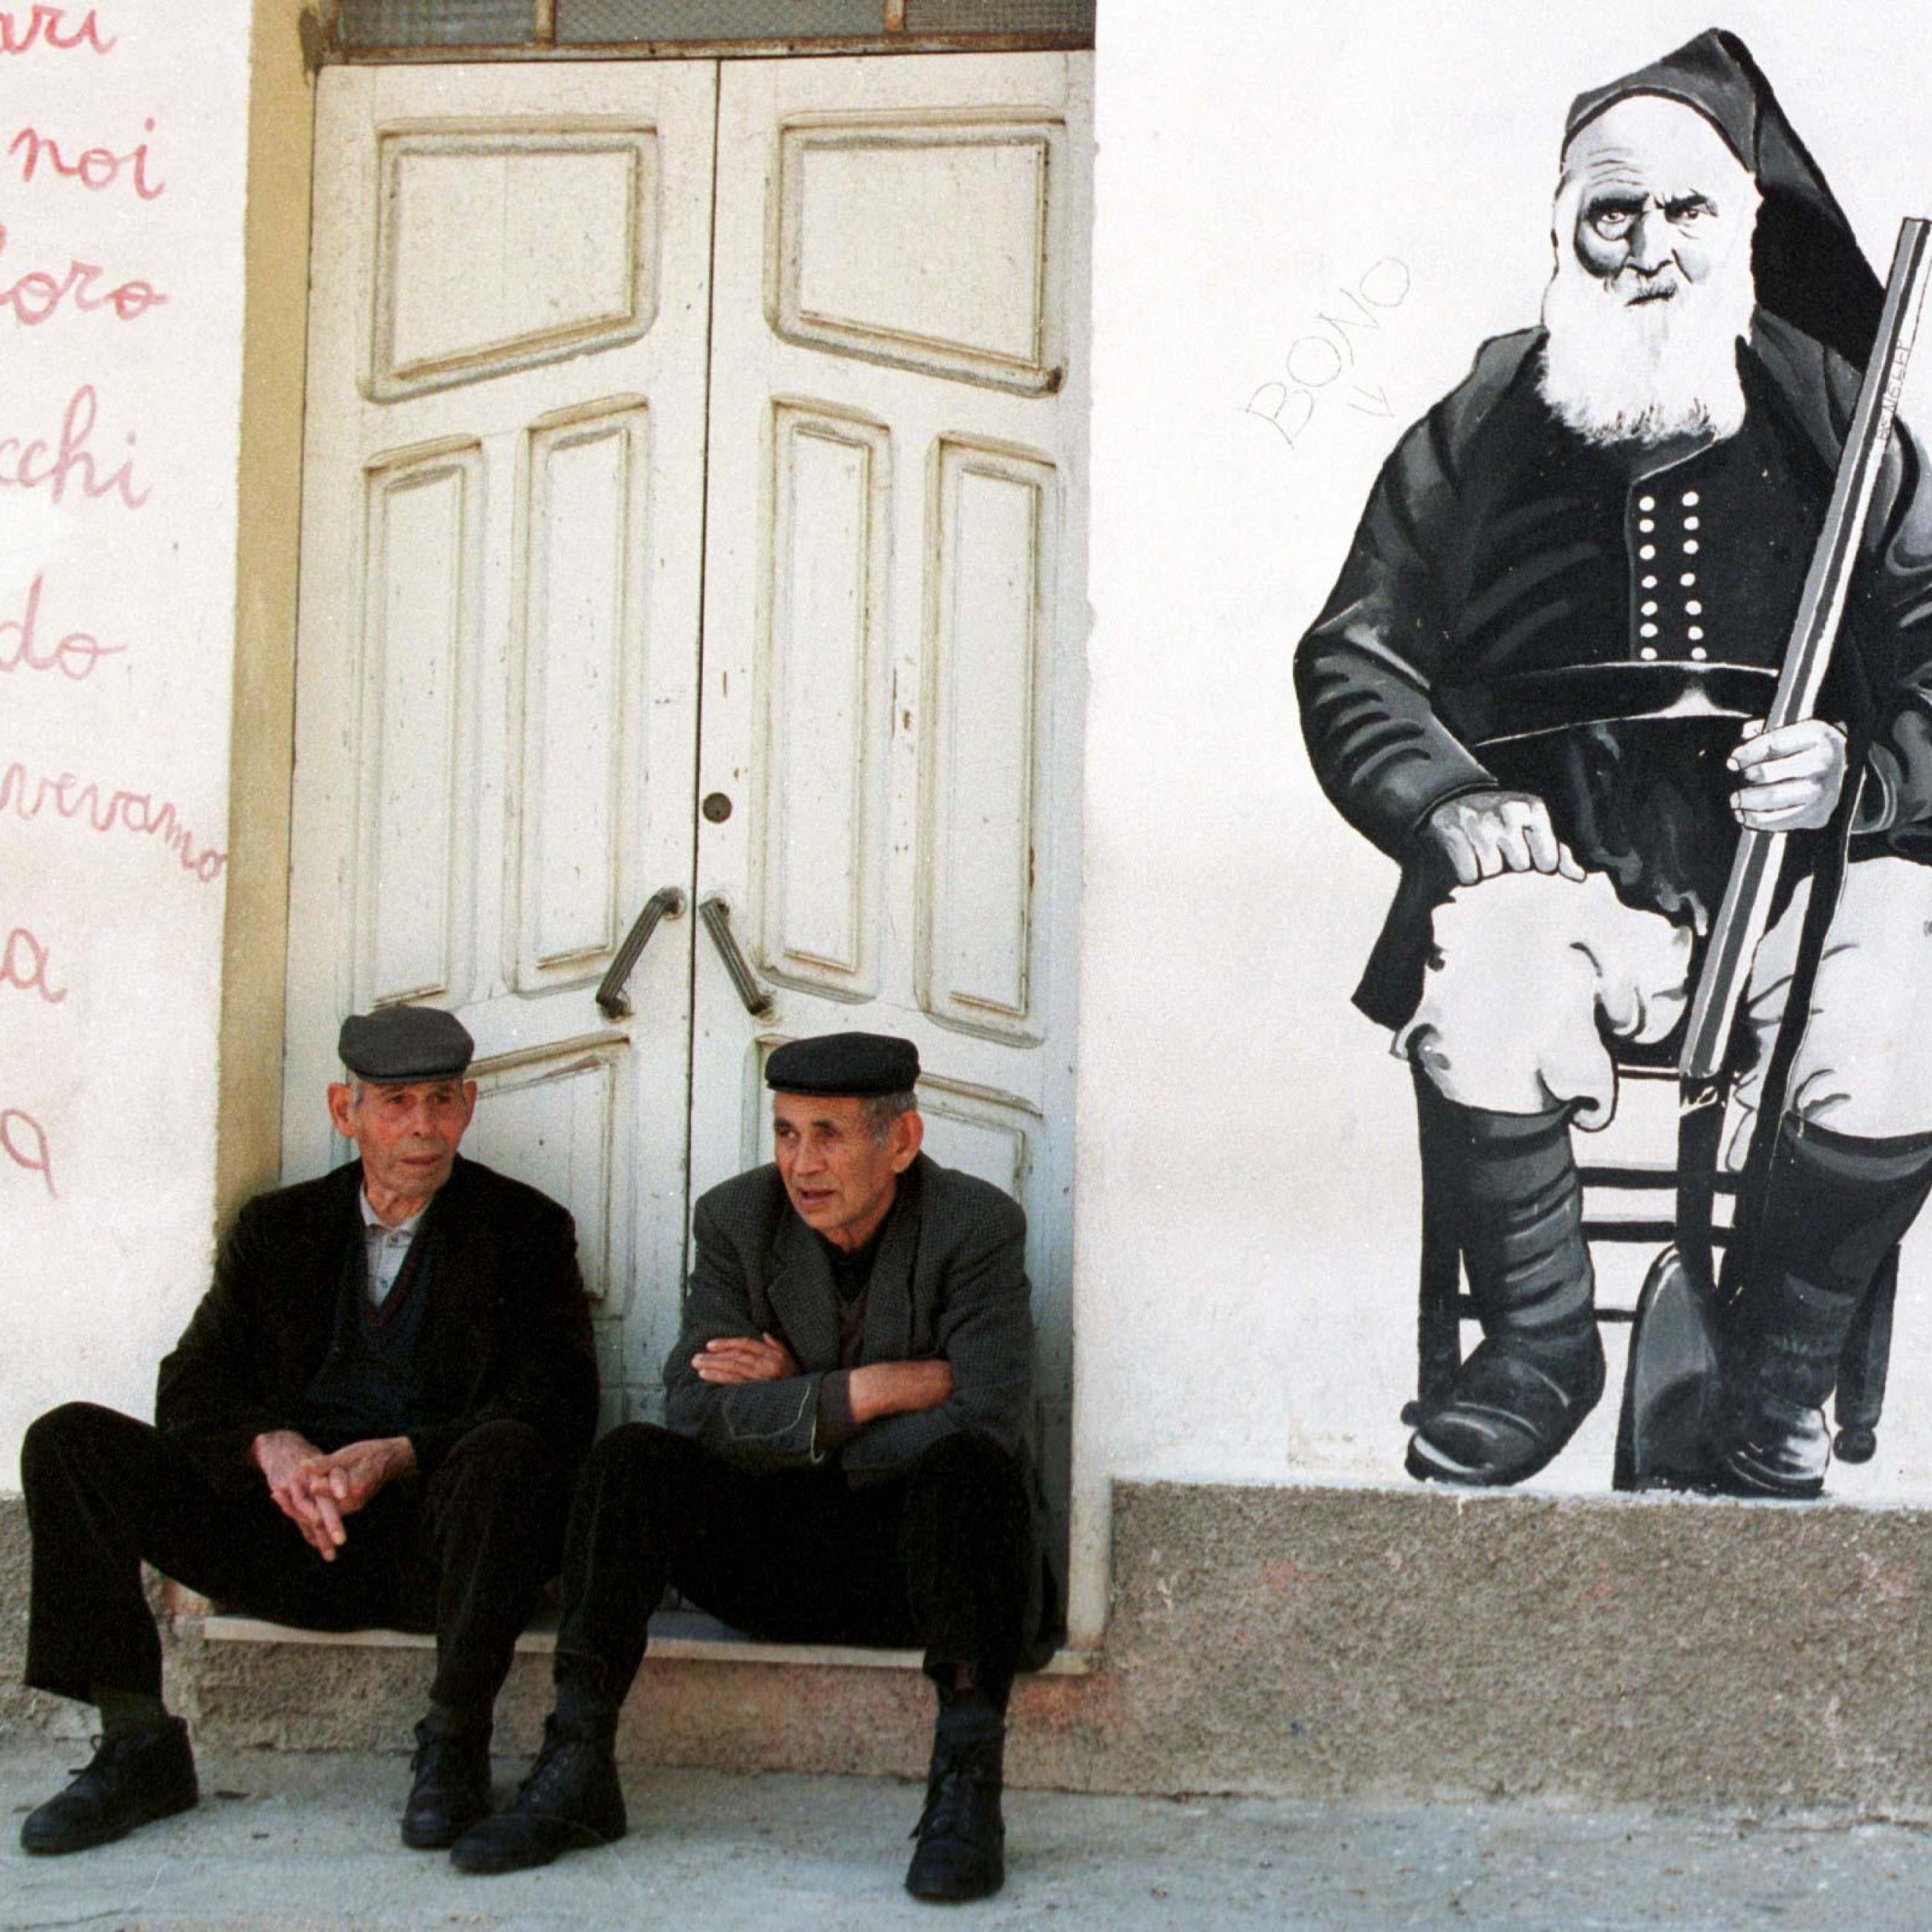 Two elderly men dressed in black suits with matching caps sit on a step in front of a black and white mural depicting an older man with a white beard wearing a military uniform